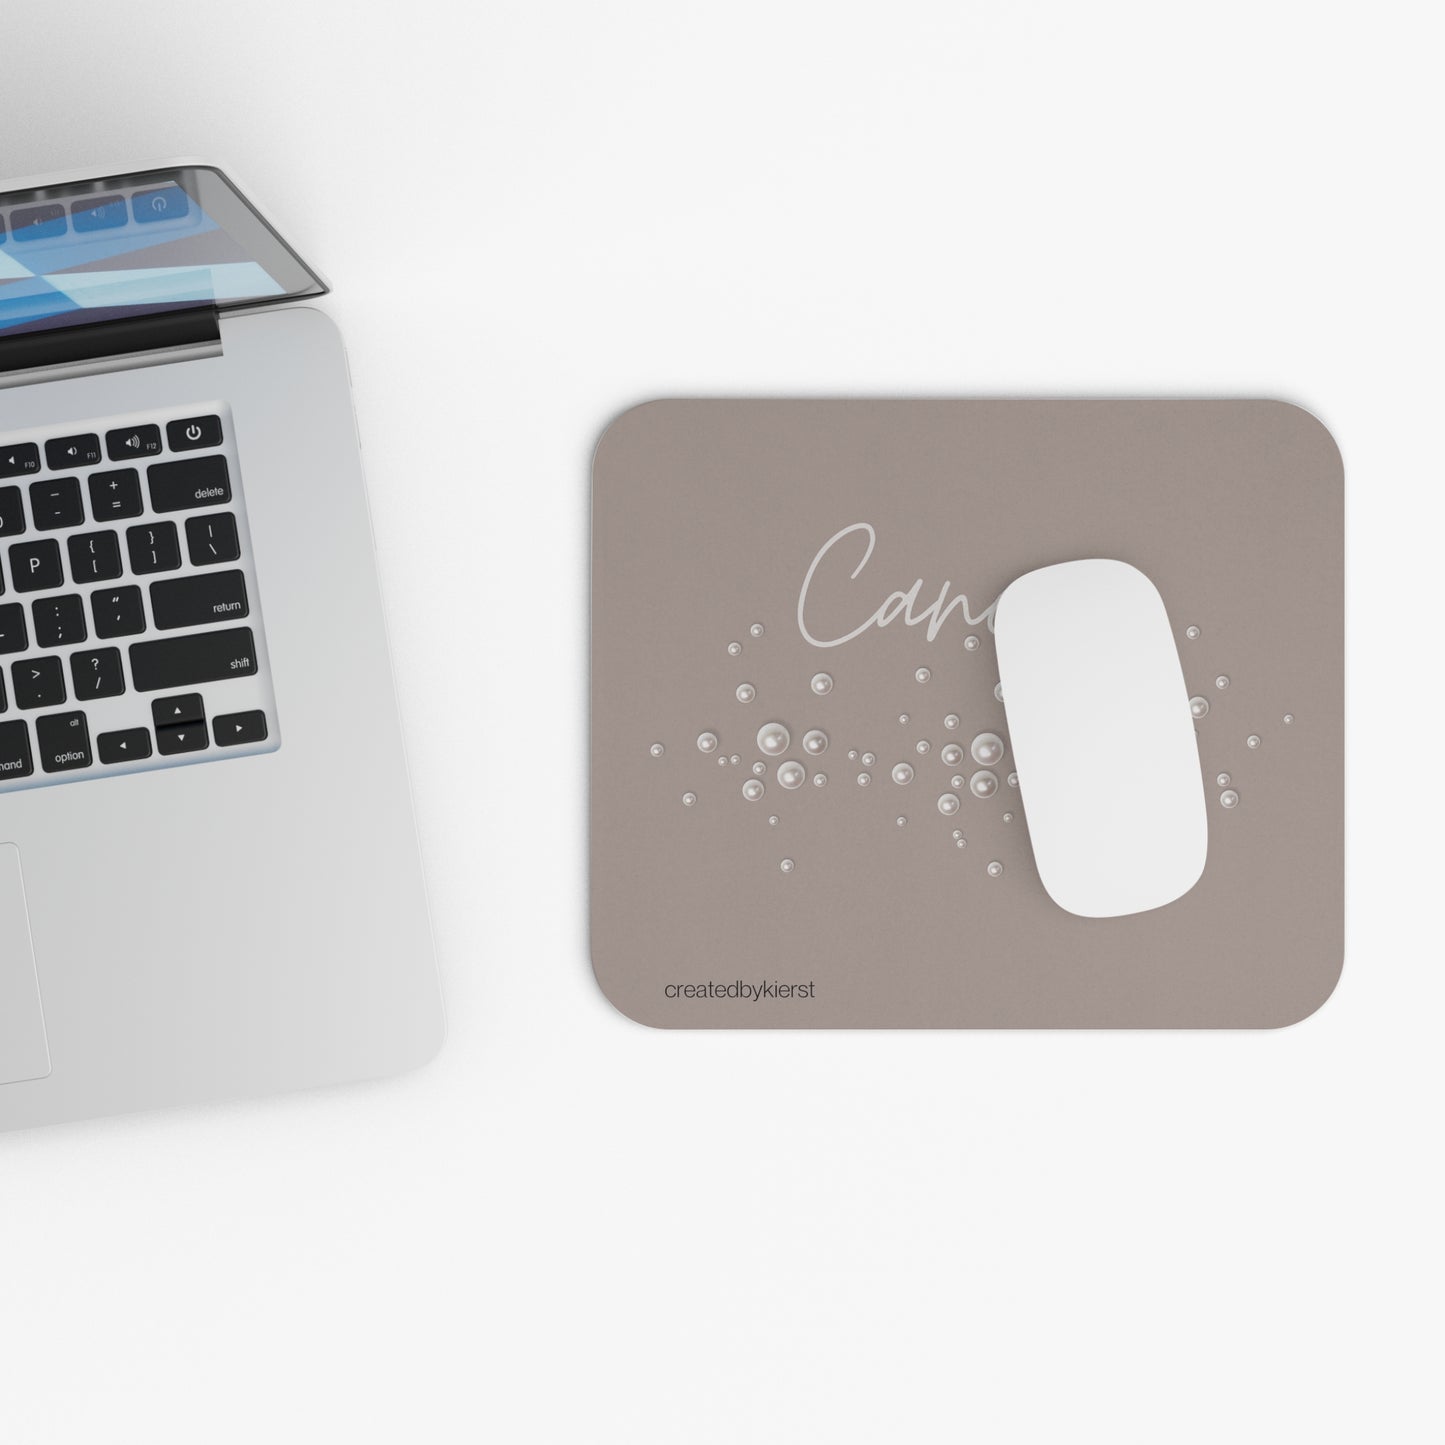 Cancer and Pearls Mouse Pad (Rectangle)